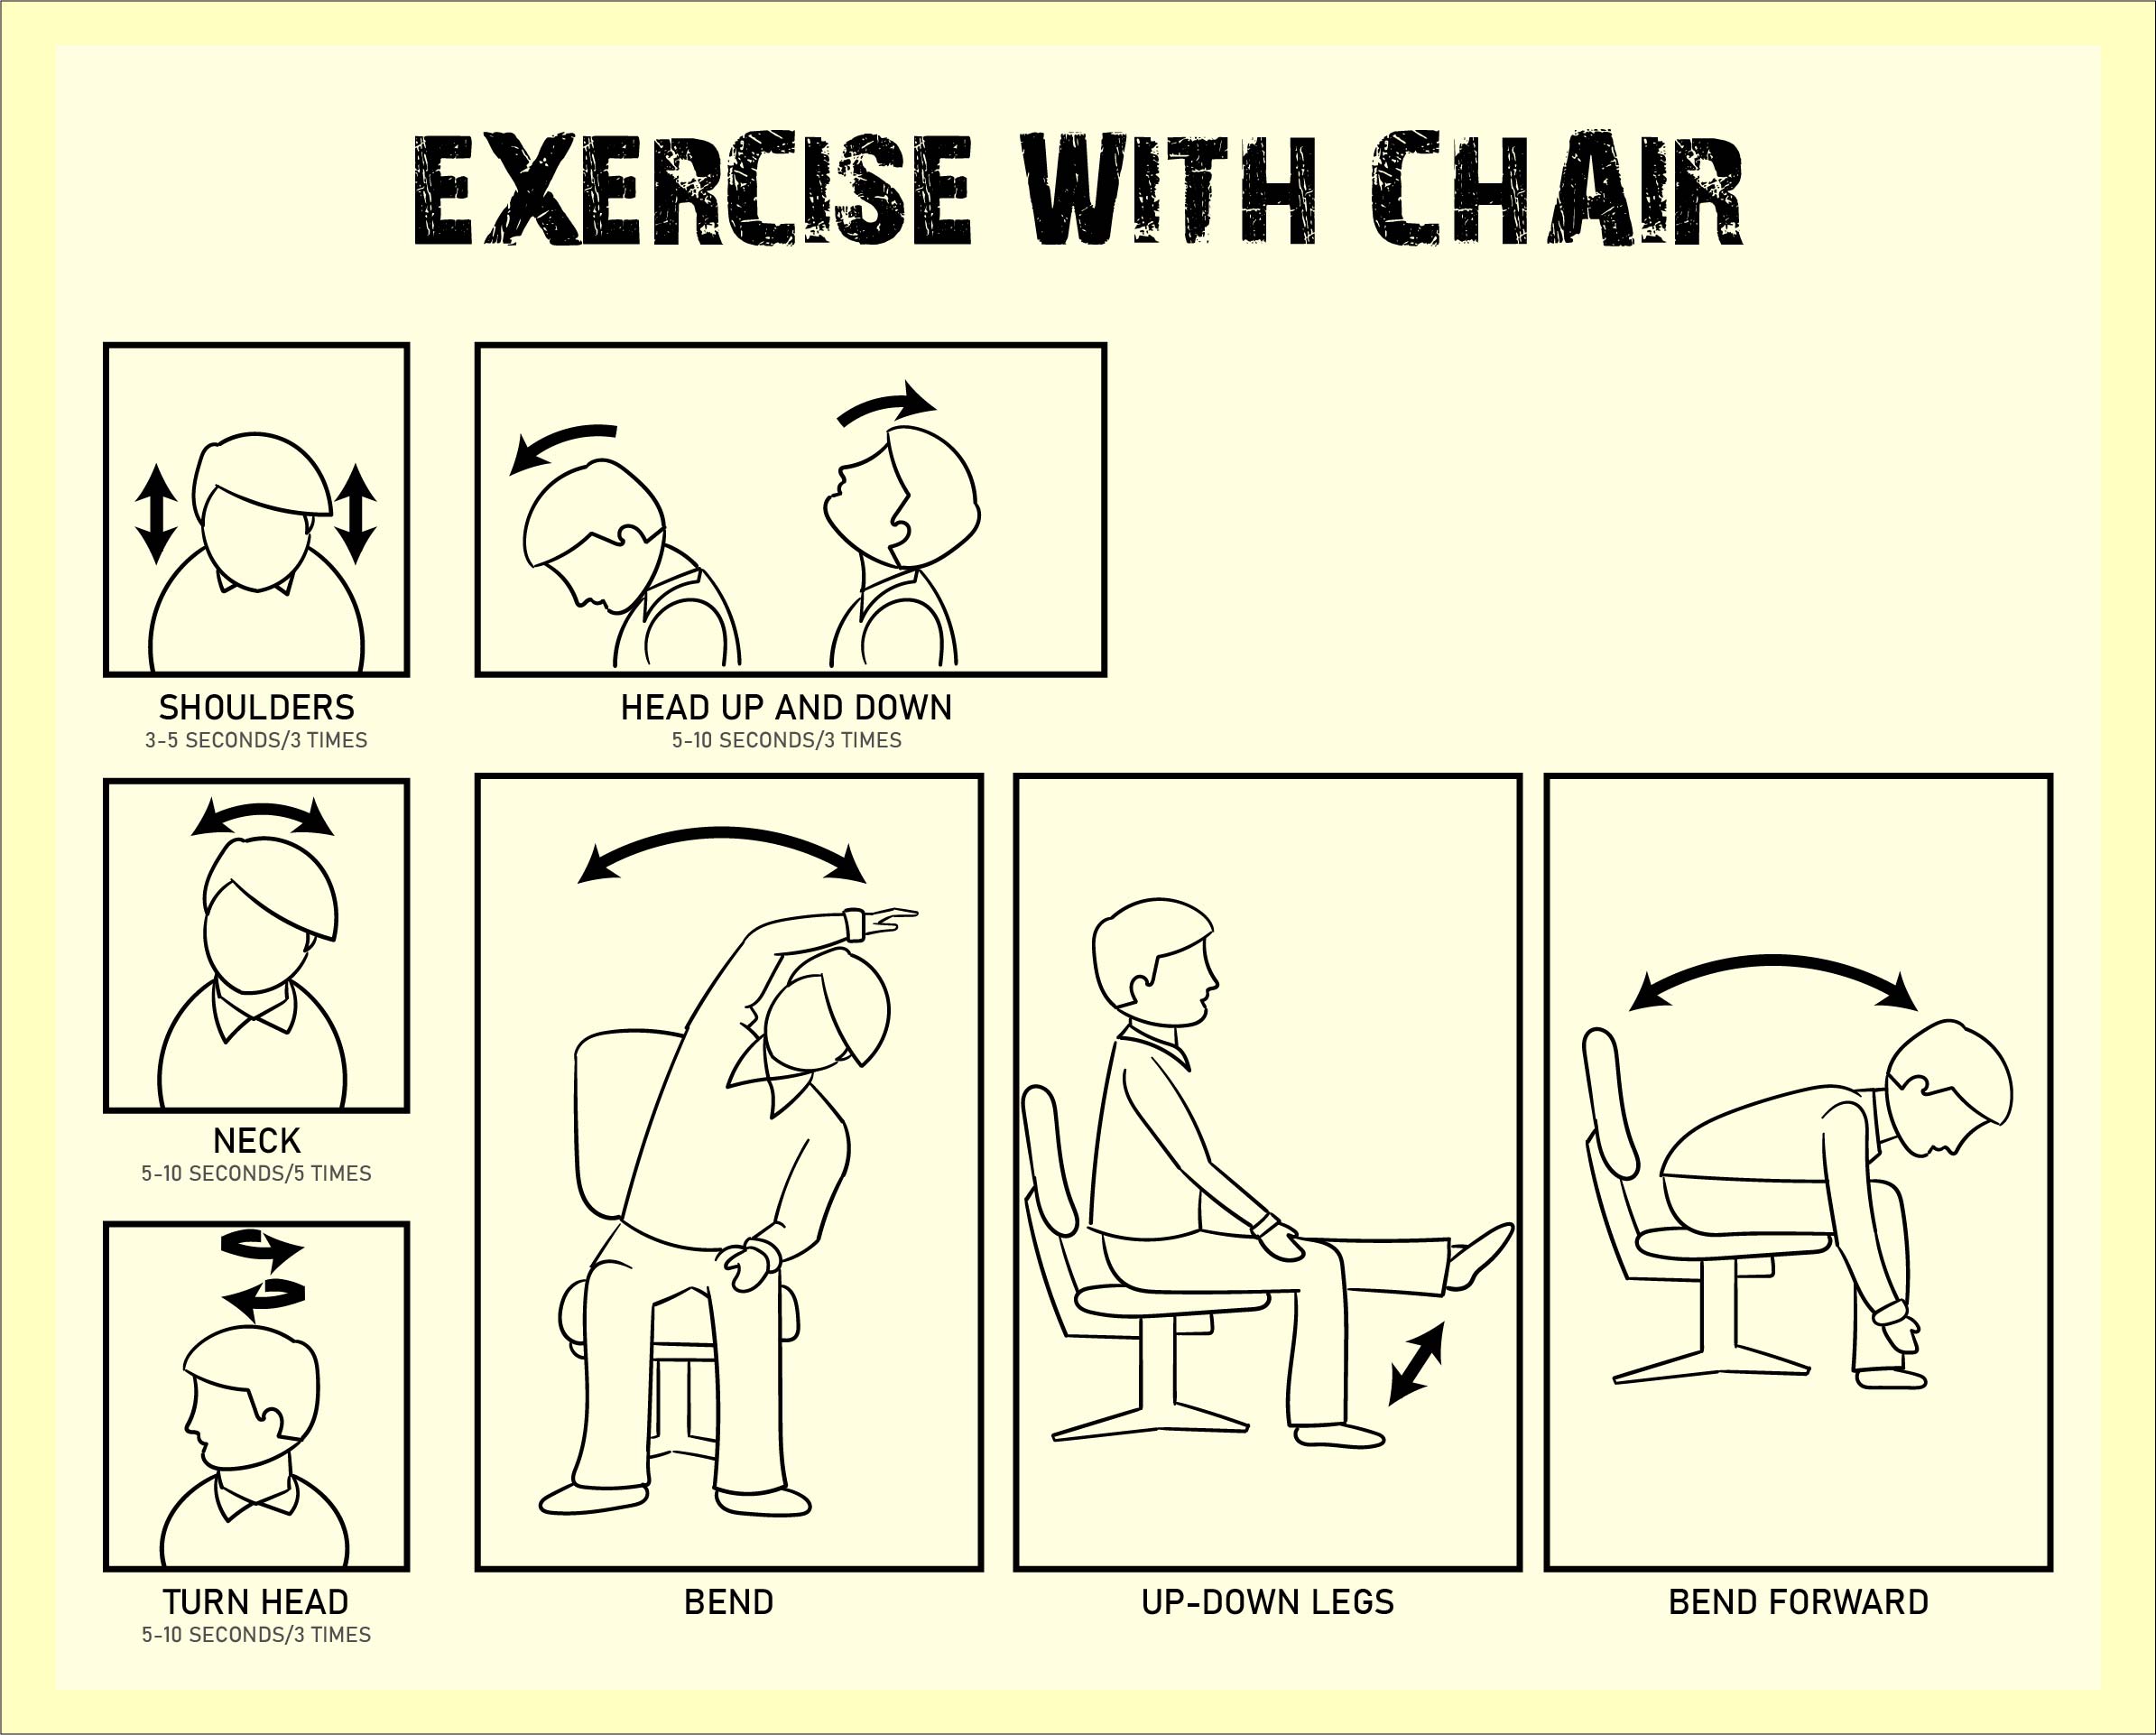 Exercise with Chair